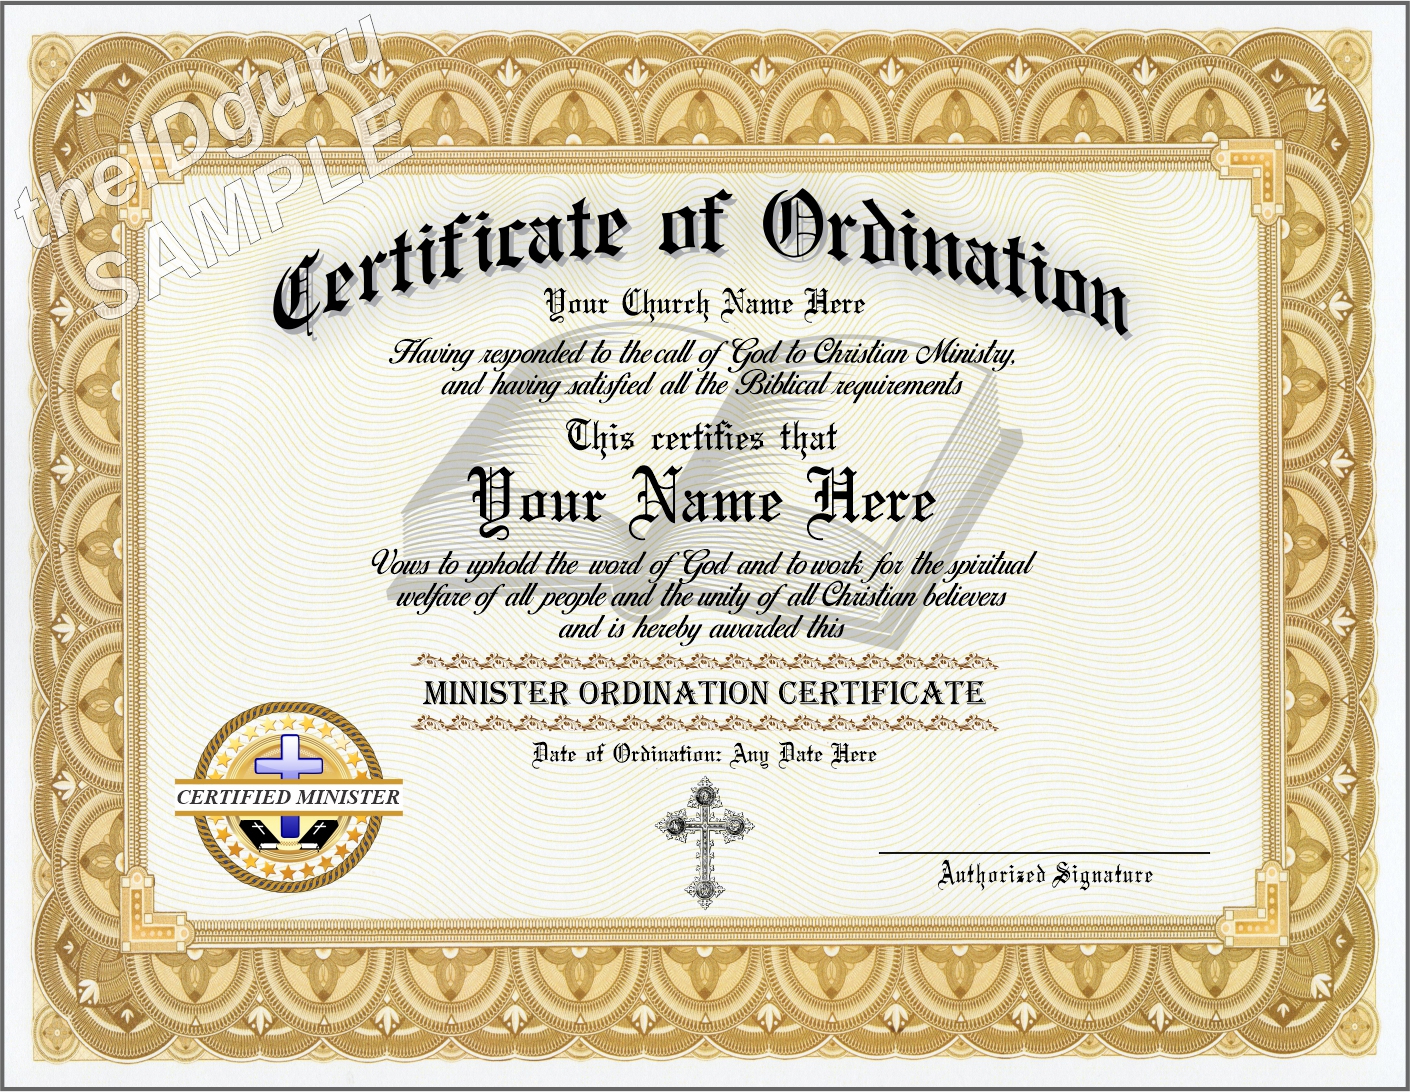 ordained-minister-certificate-custom-printed-with-your-information-and-church-logo-the-id-guru